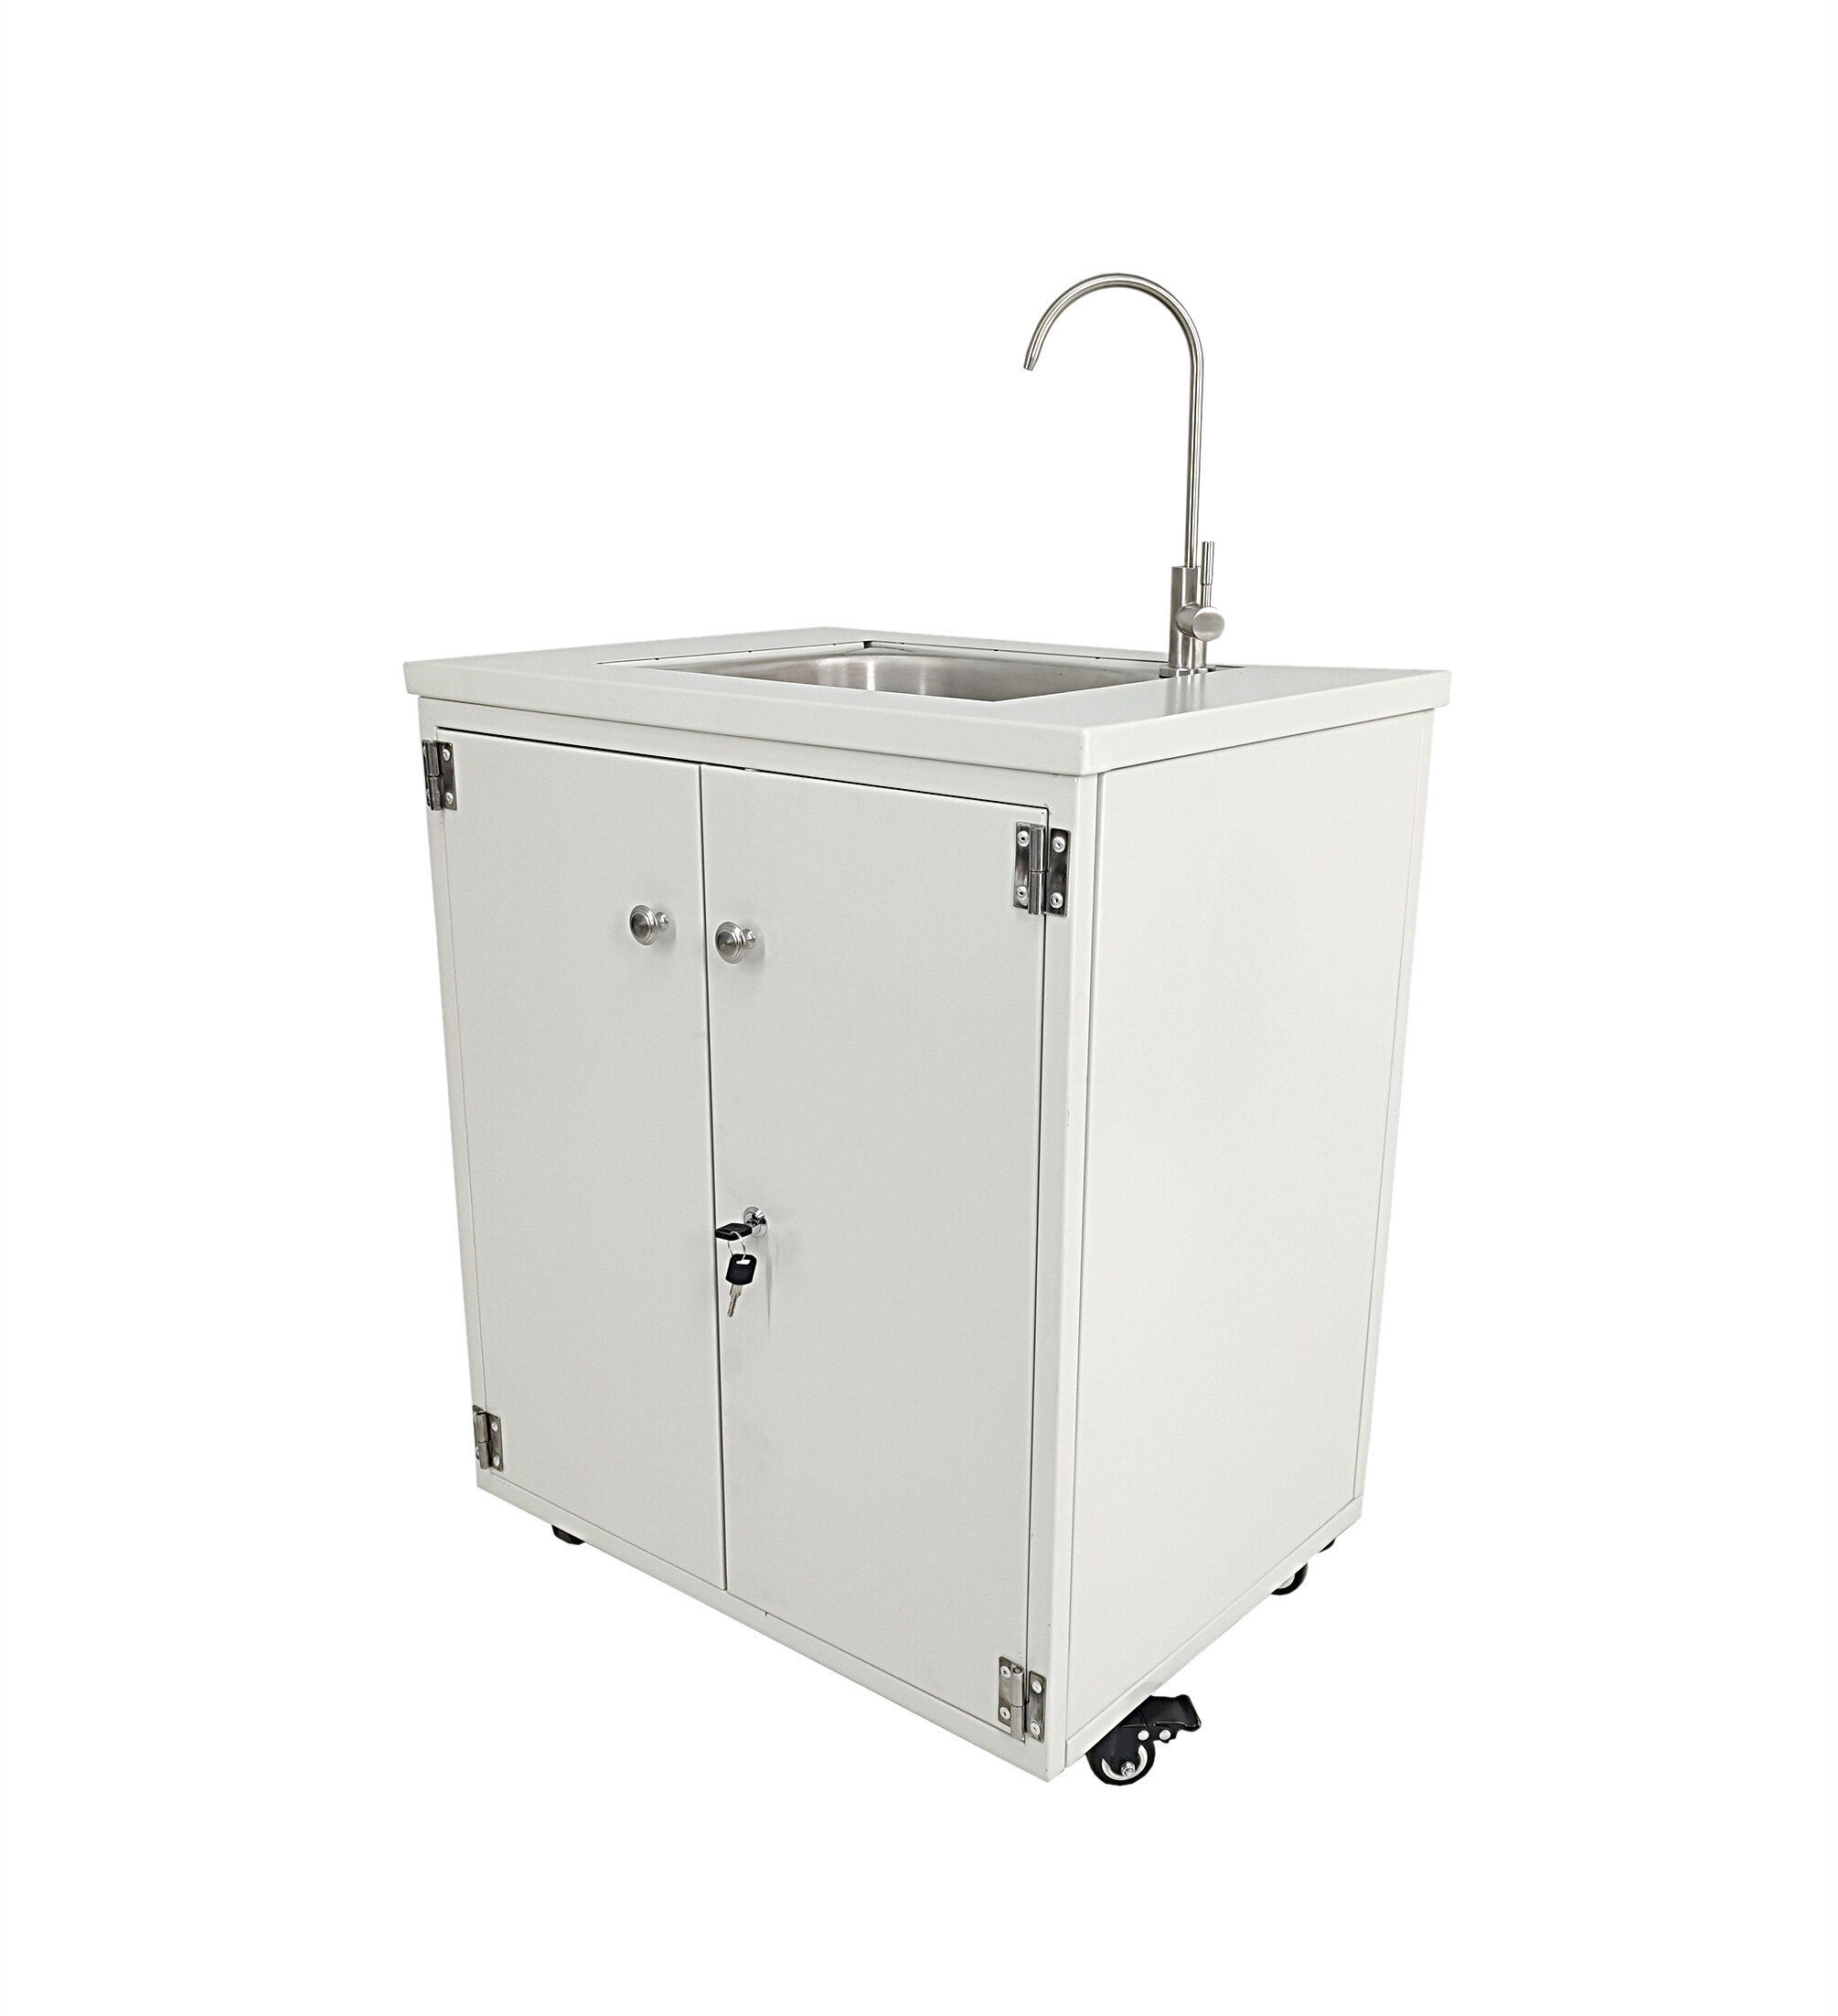 From Camping to Construction Sites: Why a Portable Hand Washing Station is  Essential - Ancaster Food Equipment